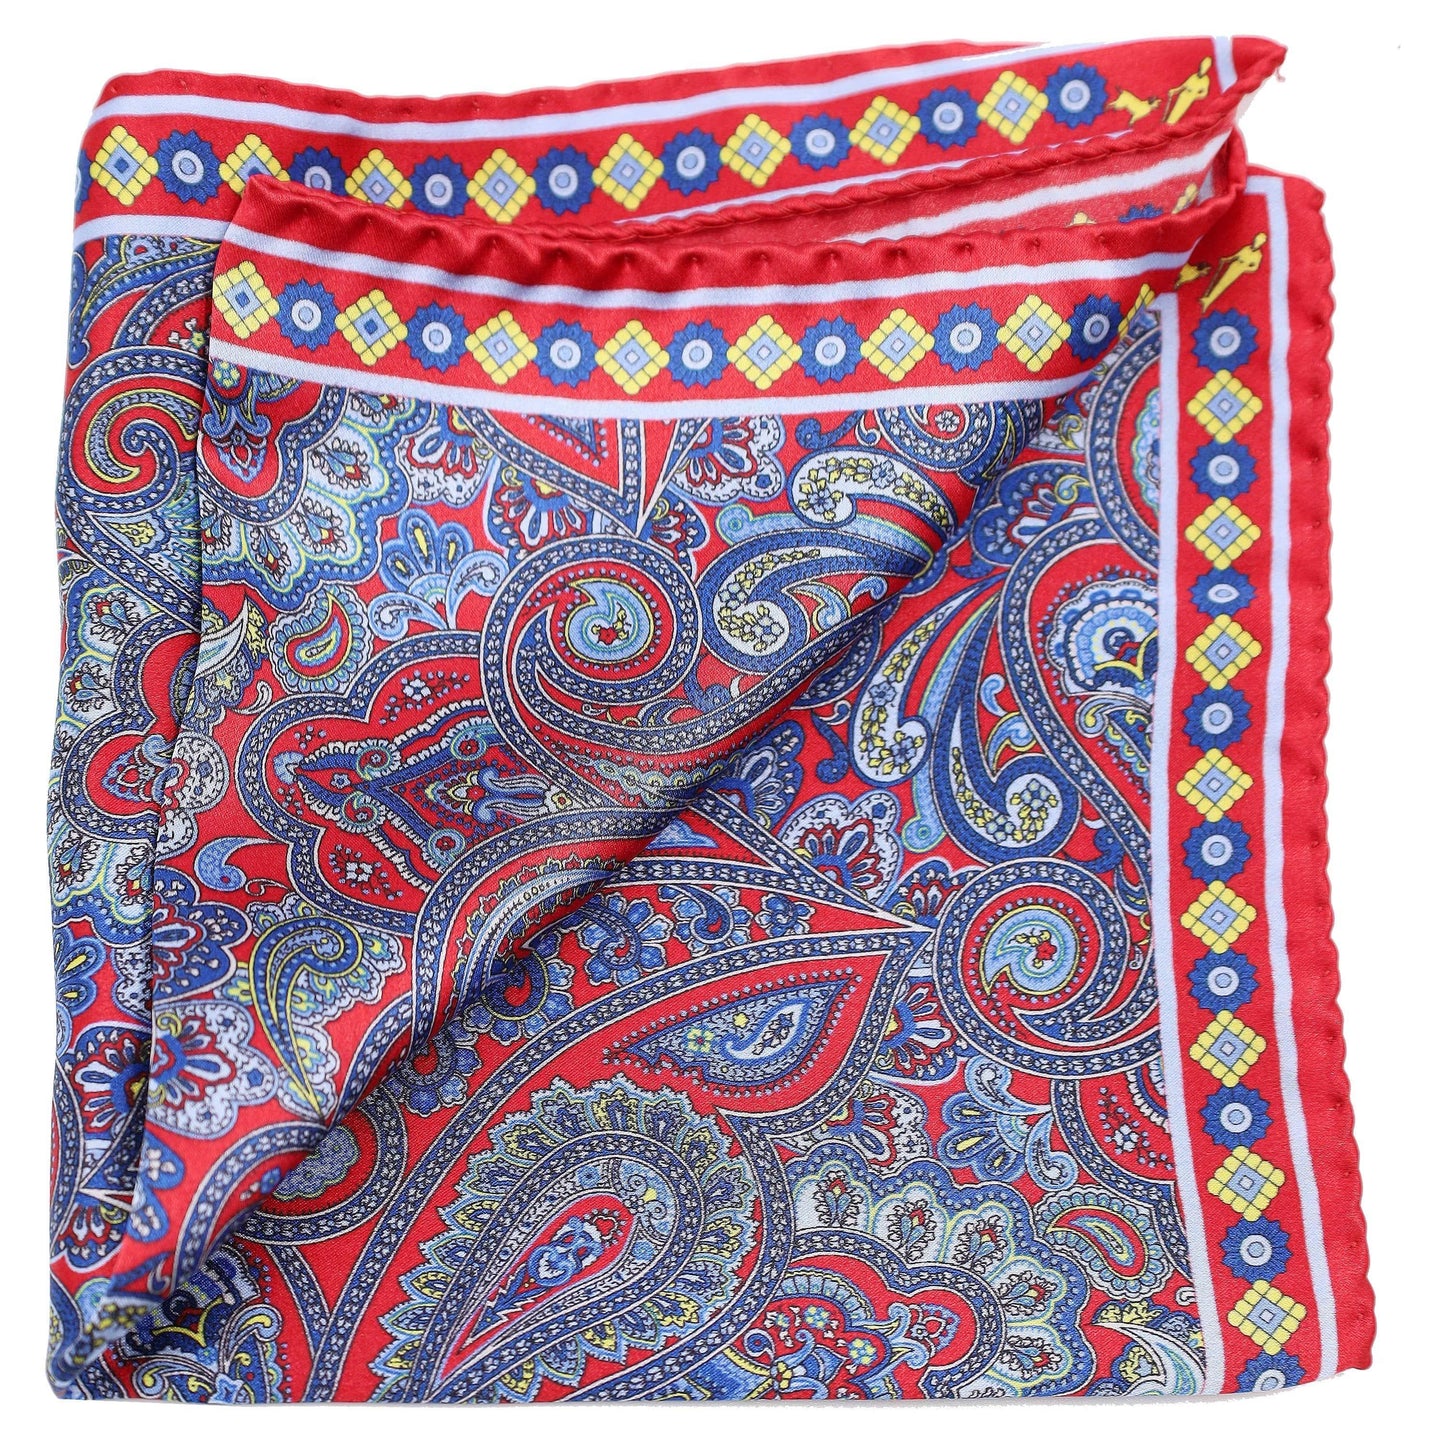 Blue and Red Paisley Silk Pocket Square - Just White Shirts